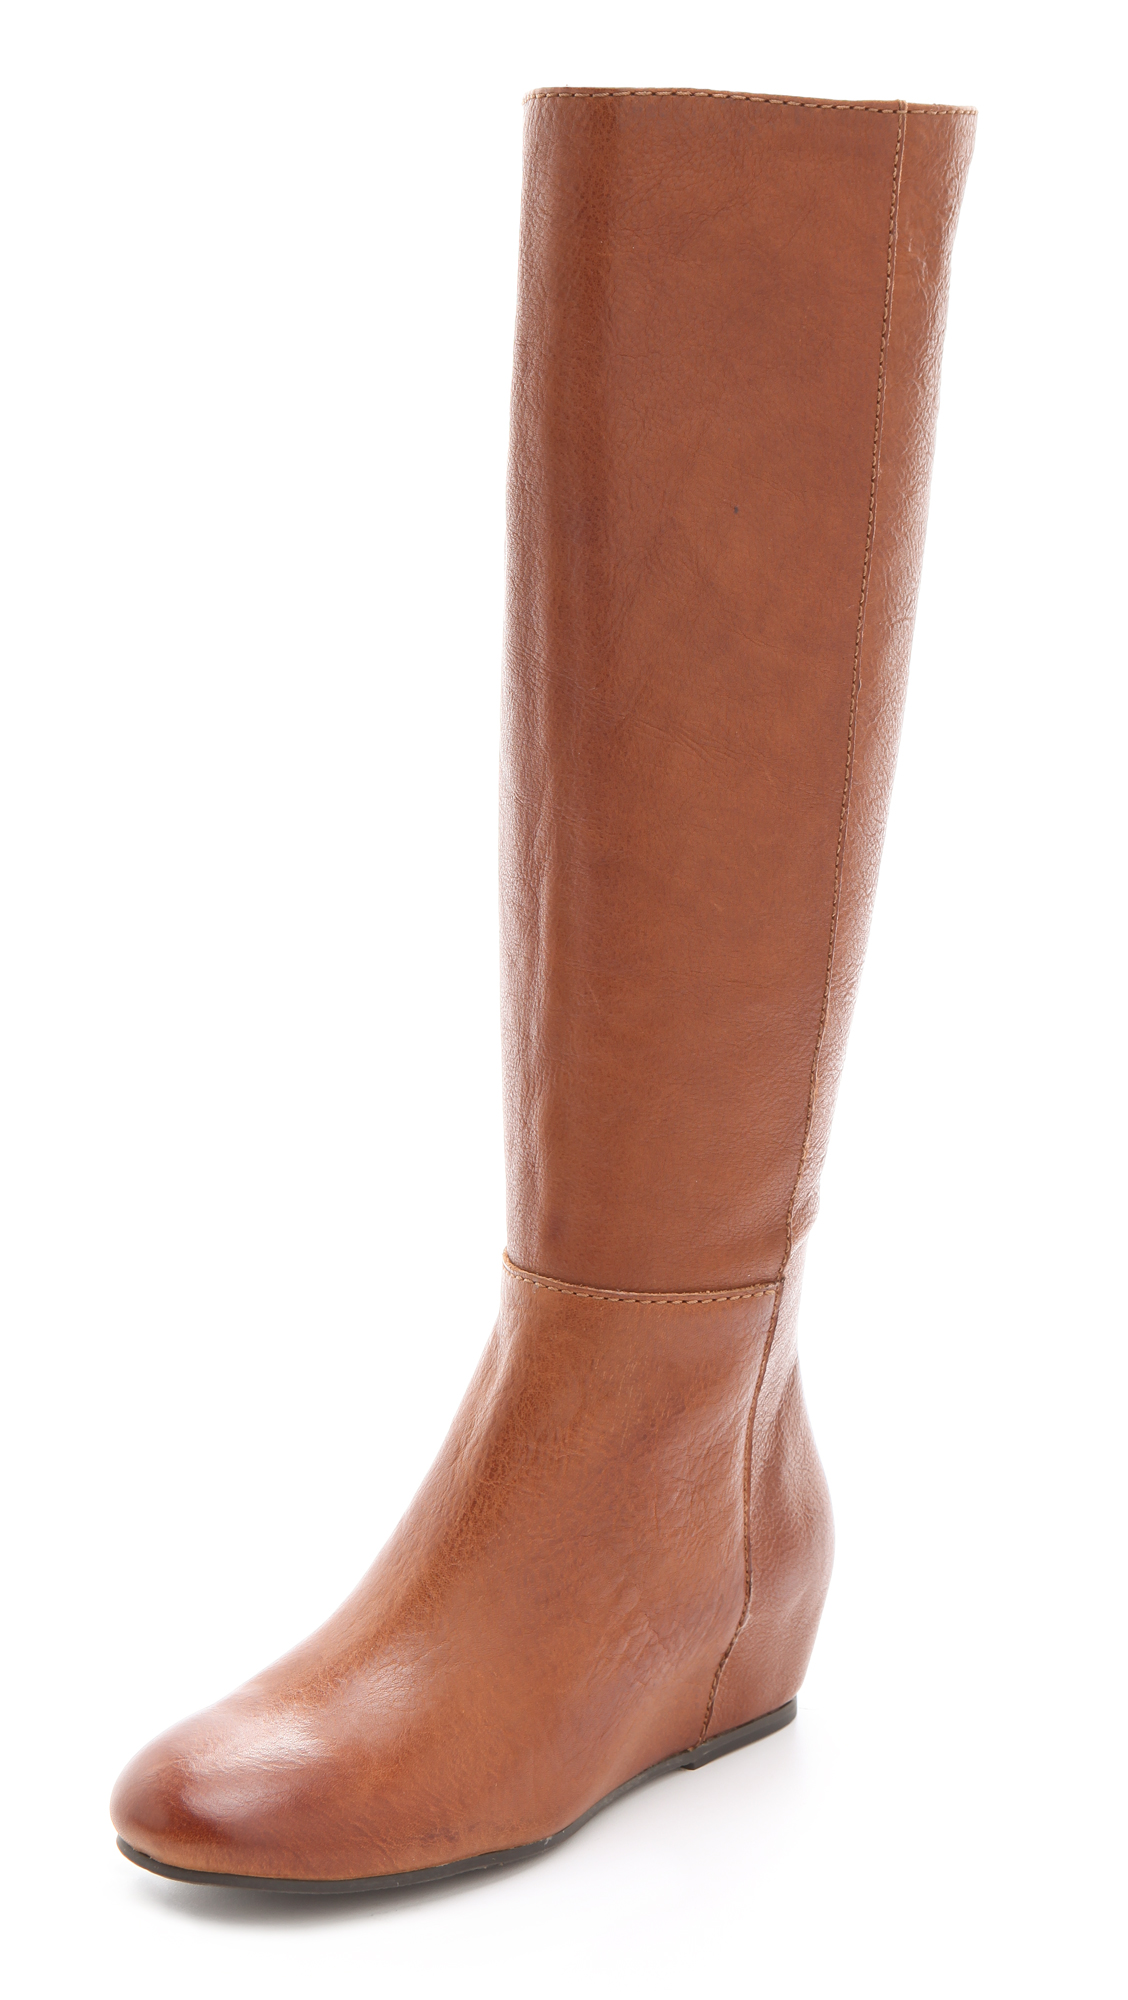 Lyst - Boutique 9 Zanny Knee High Boots in Brown